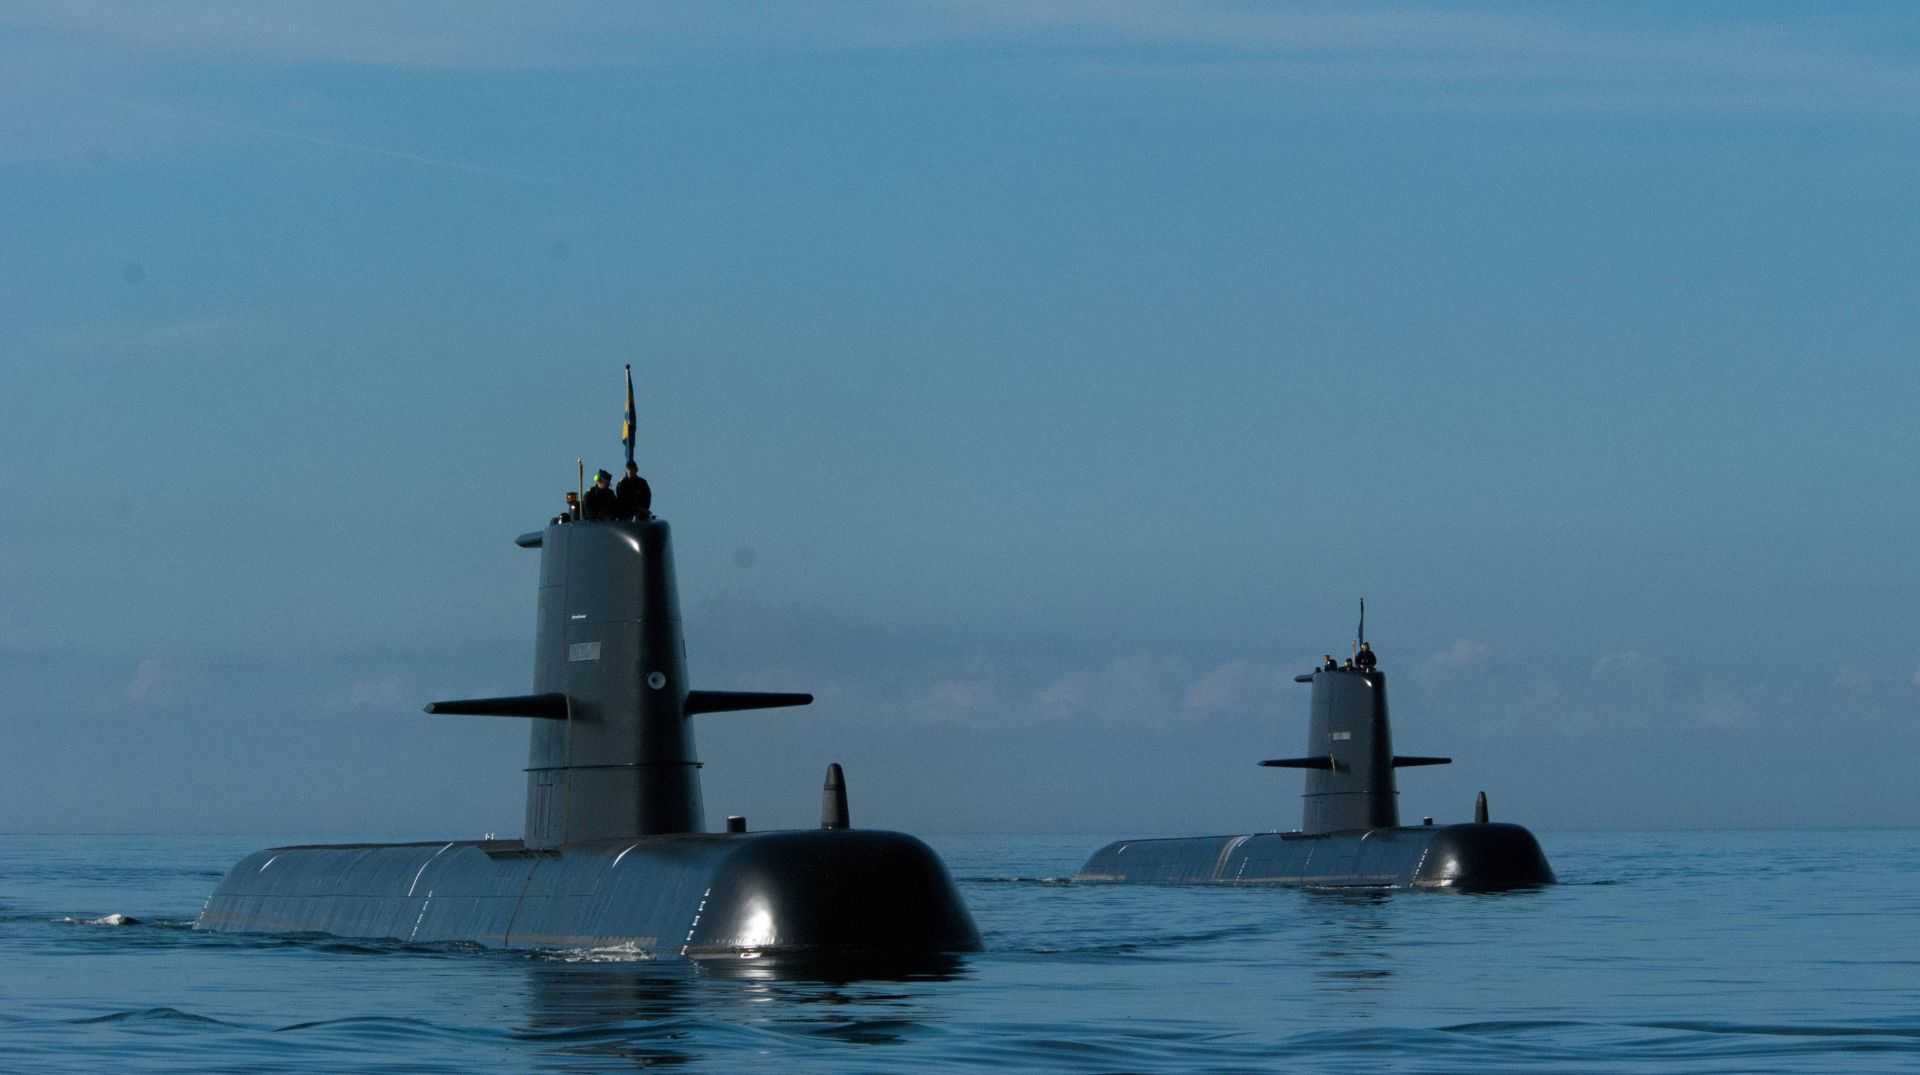 Two surfaced Gotland-class submarines